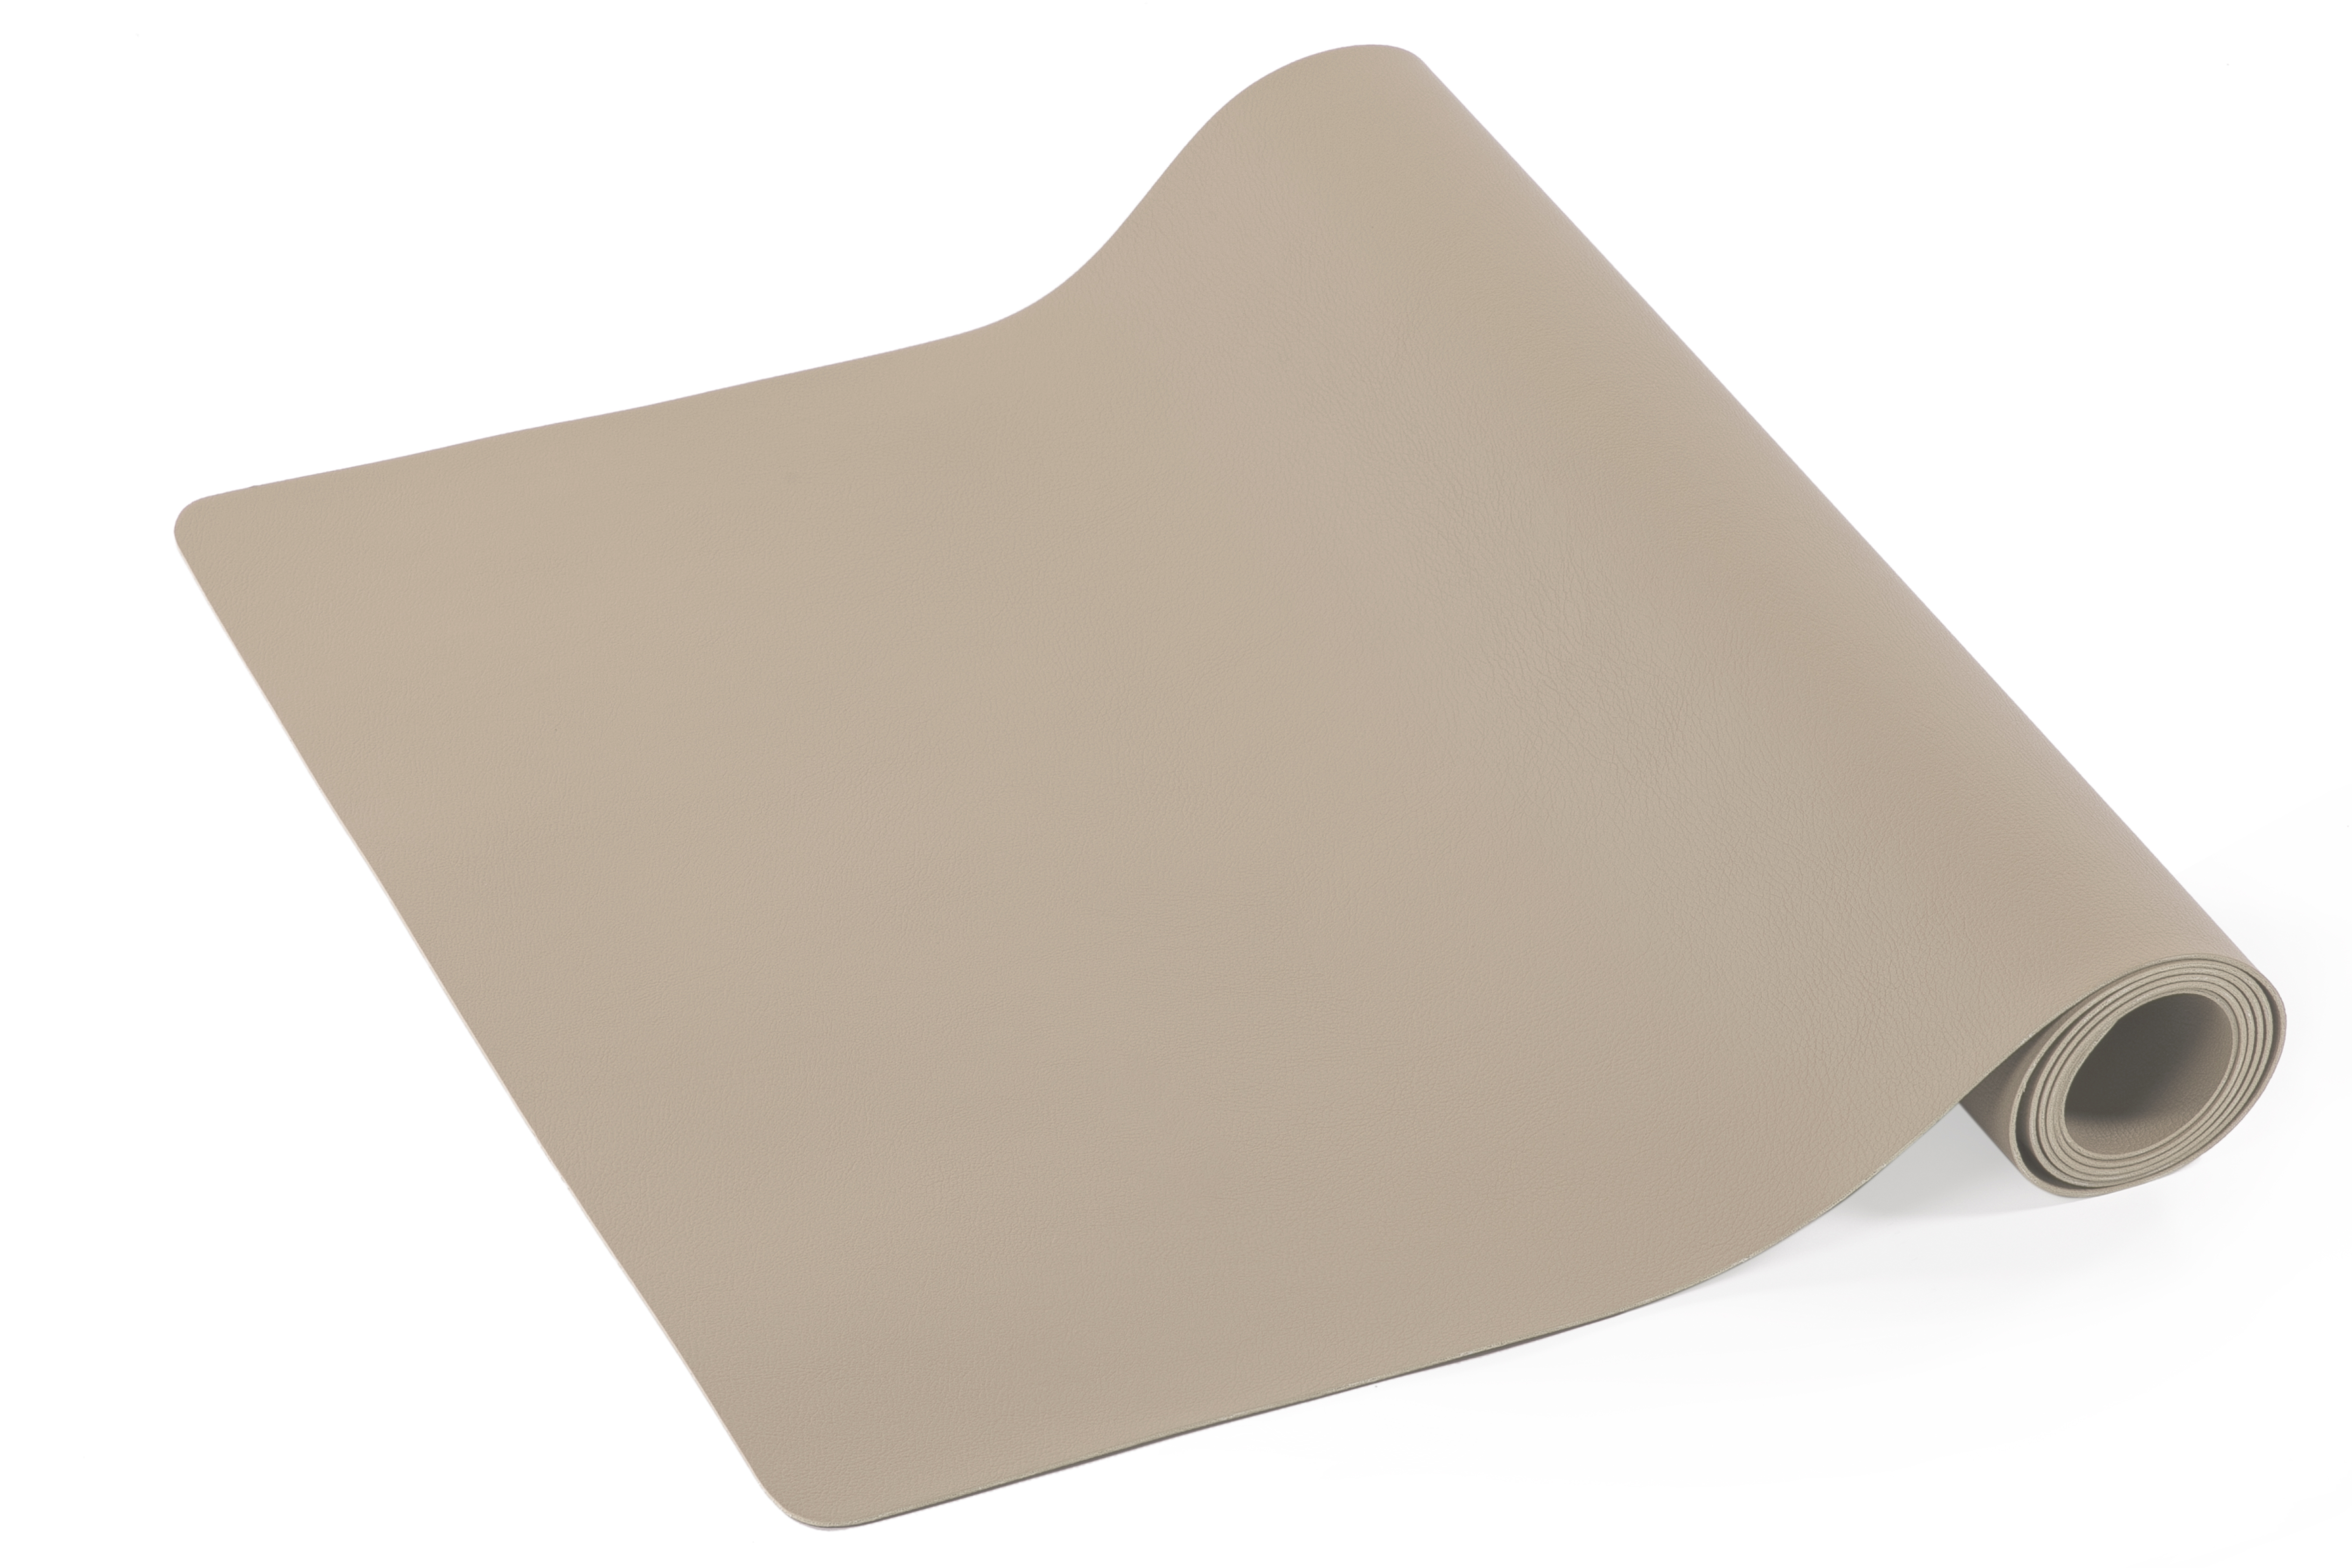 Chemin de table - Leather look imitation - 45X145cm, taupe